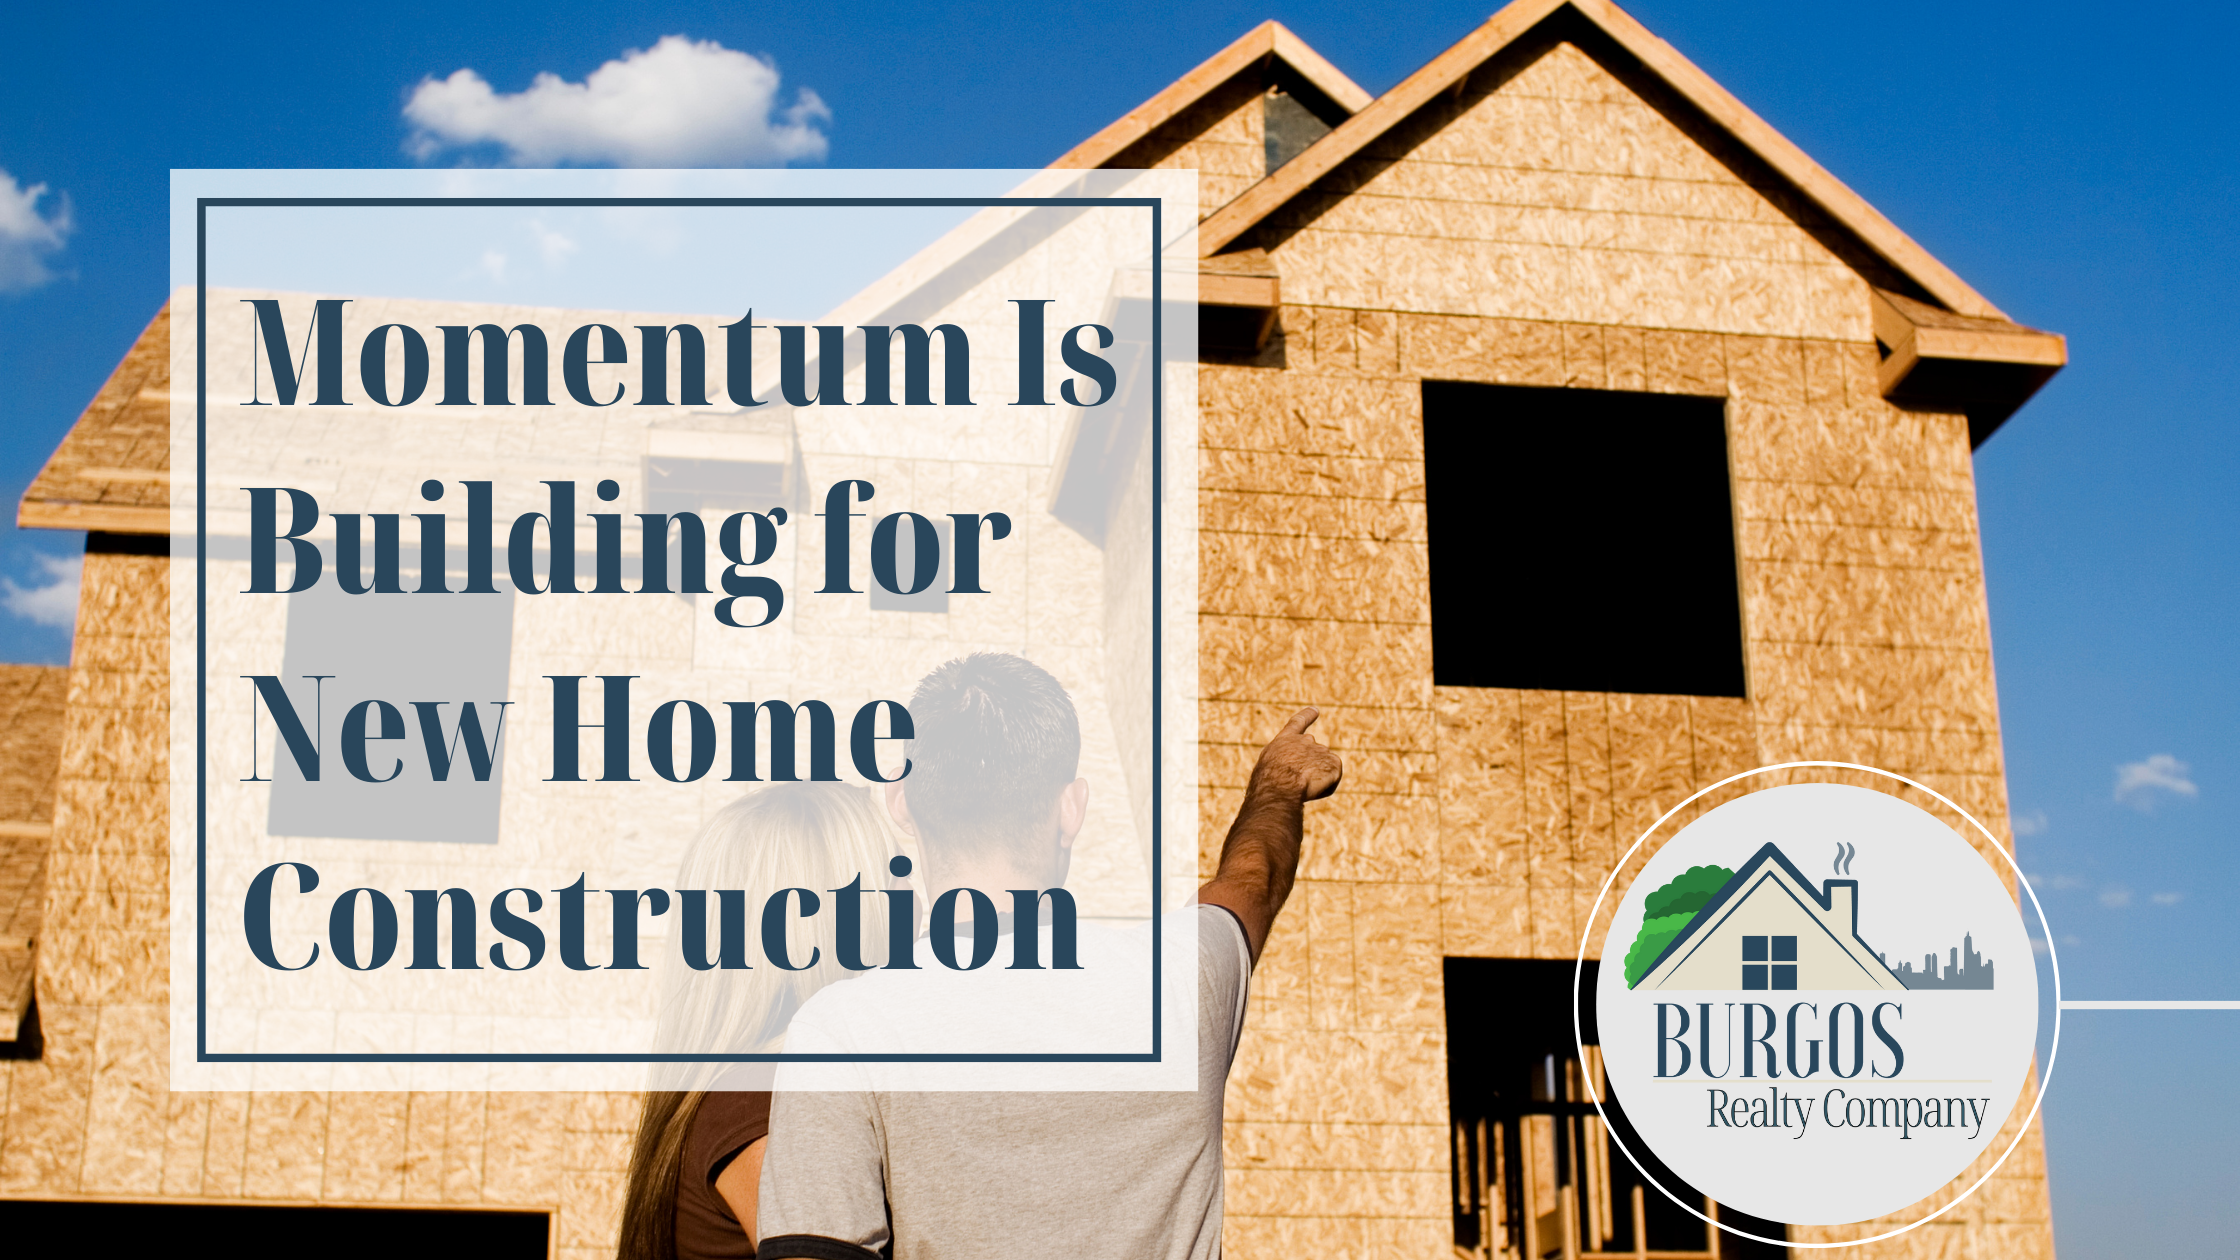 Blog about momentum is building for new home construction